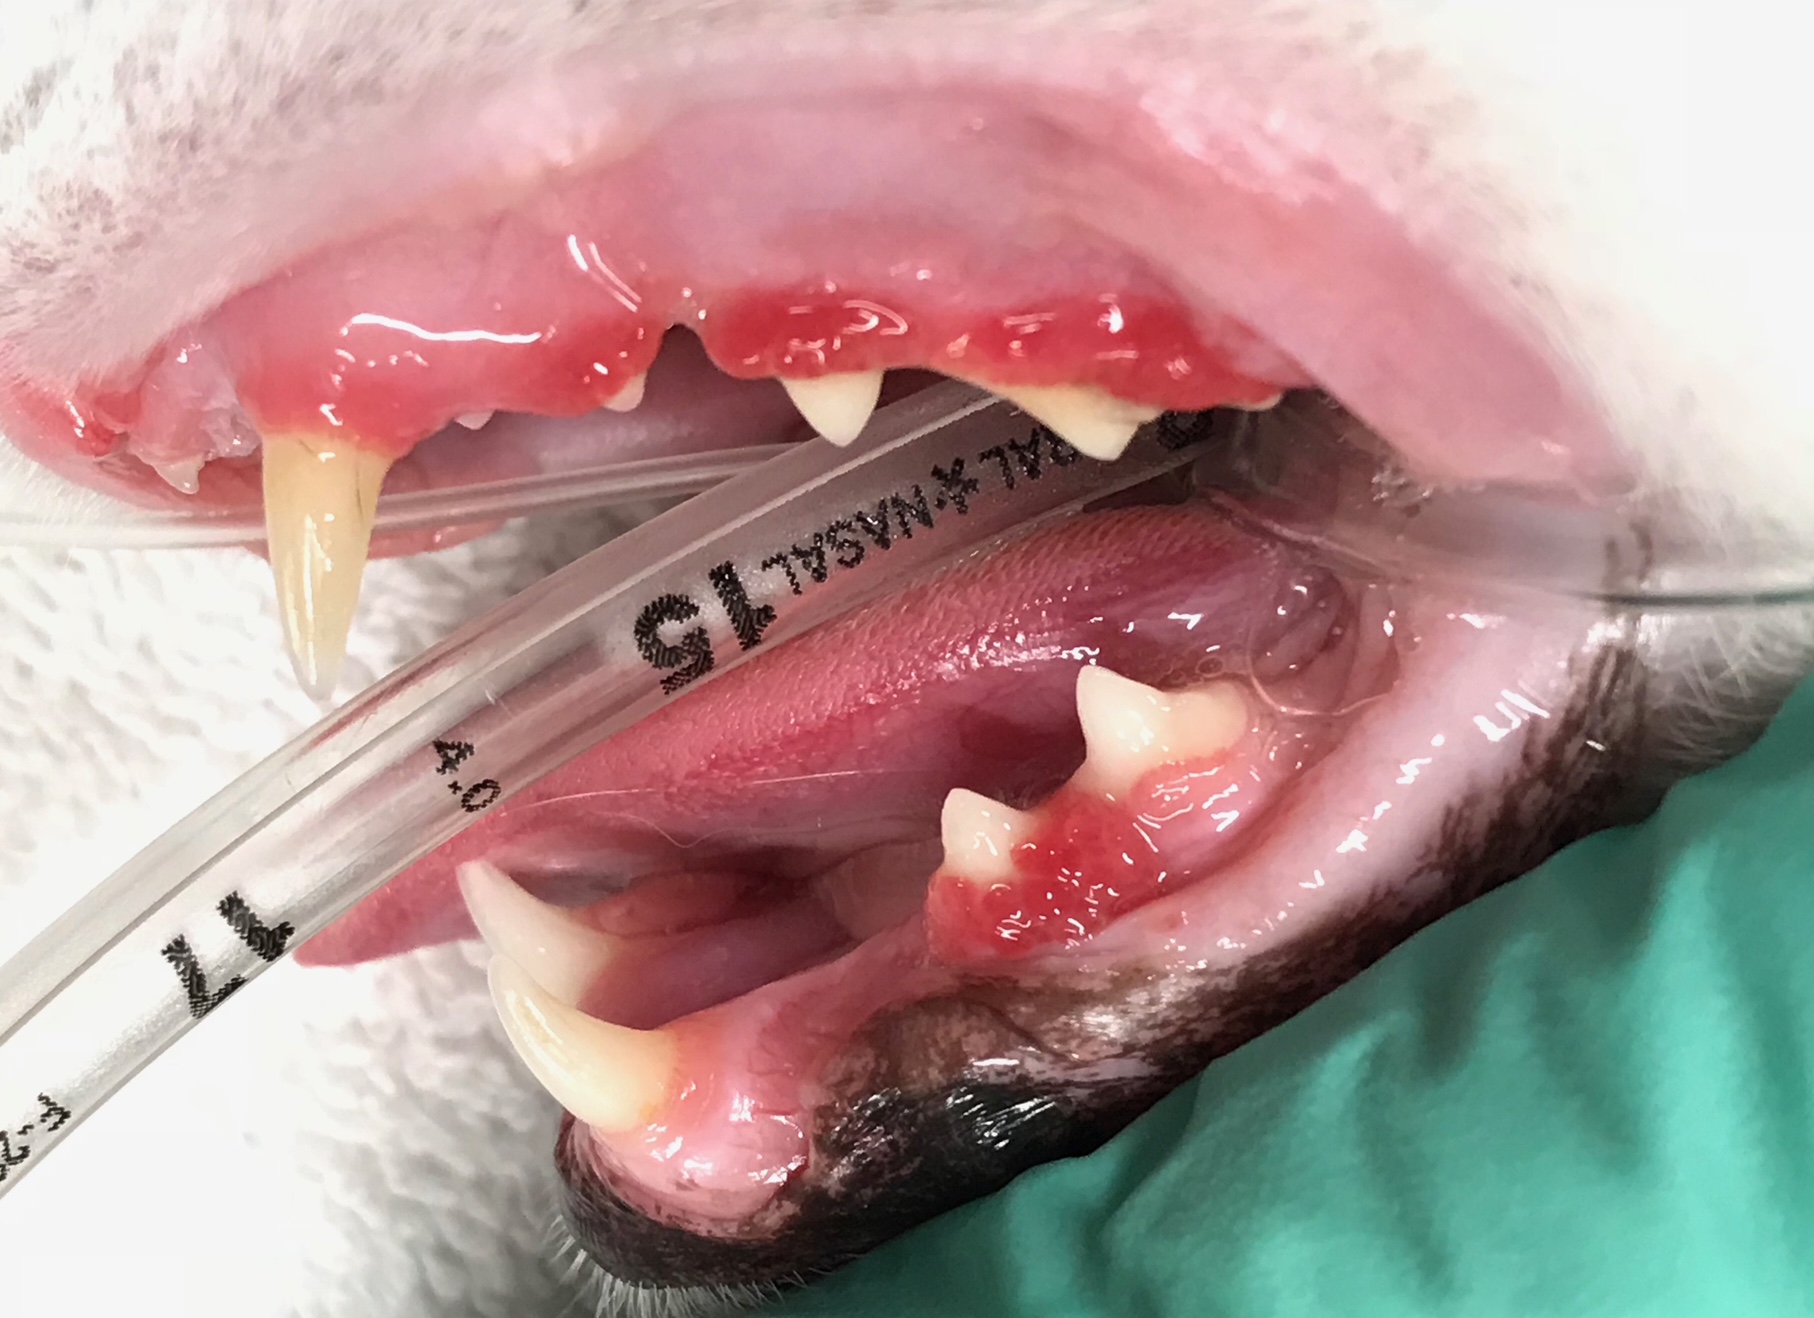 cat gum disease - cats mouth with periodontal disease